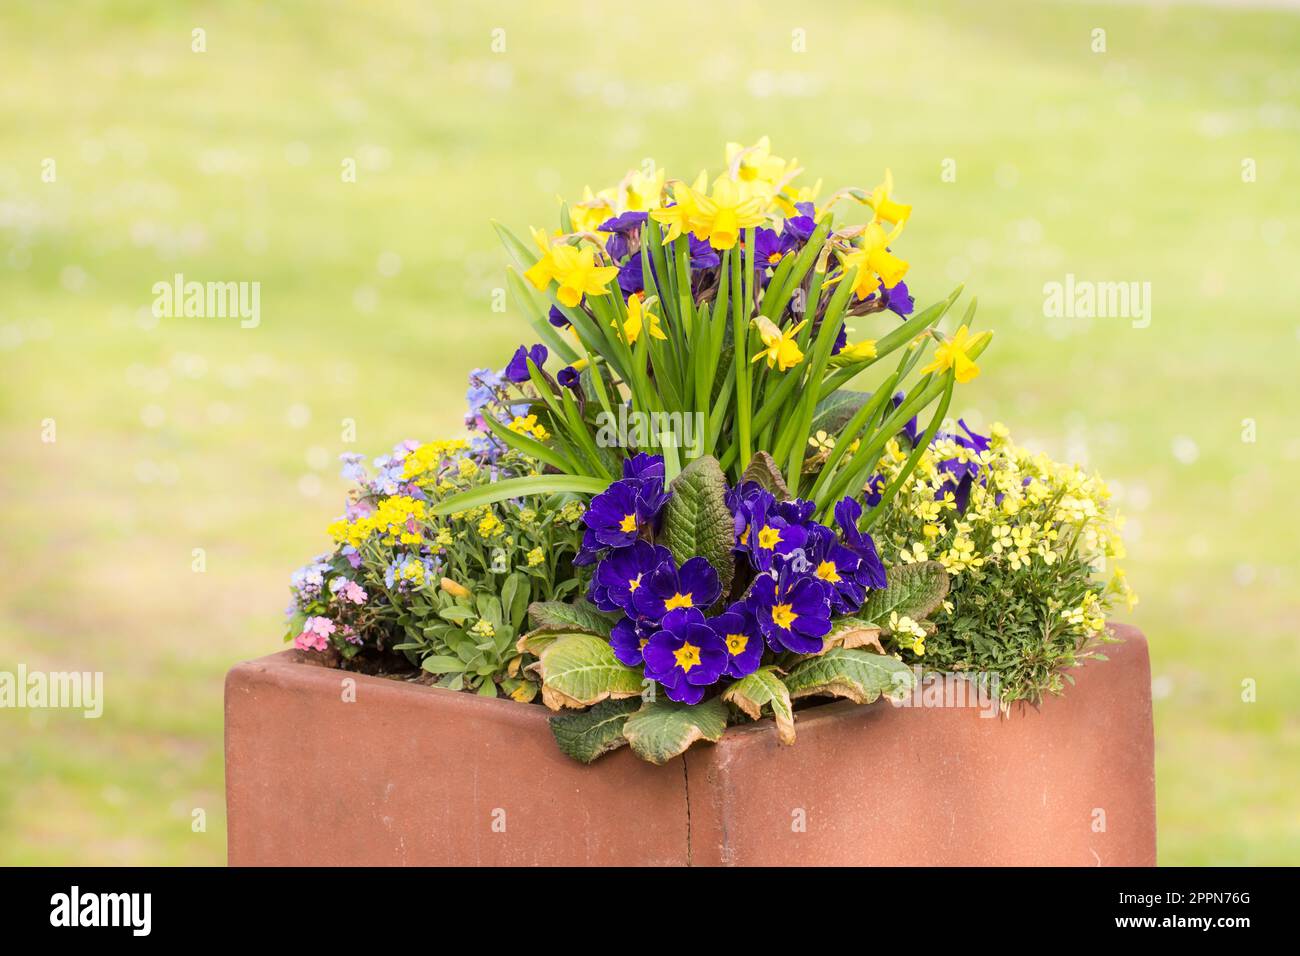 Rectangular flower pot in a park filled with pansies and daffodiles Stock Photo